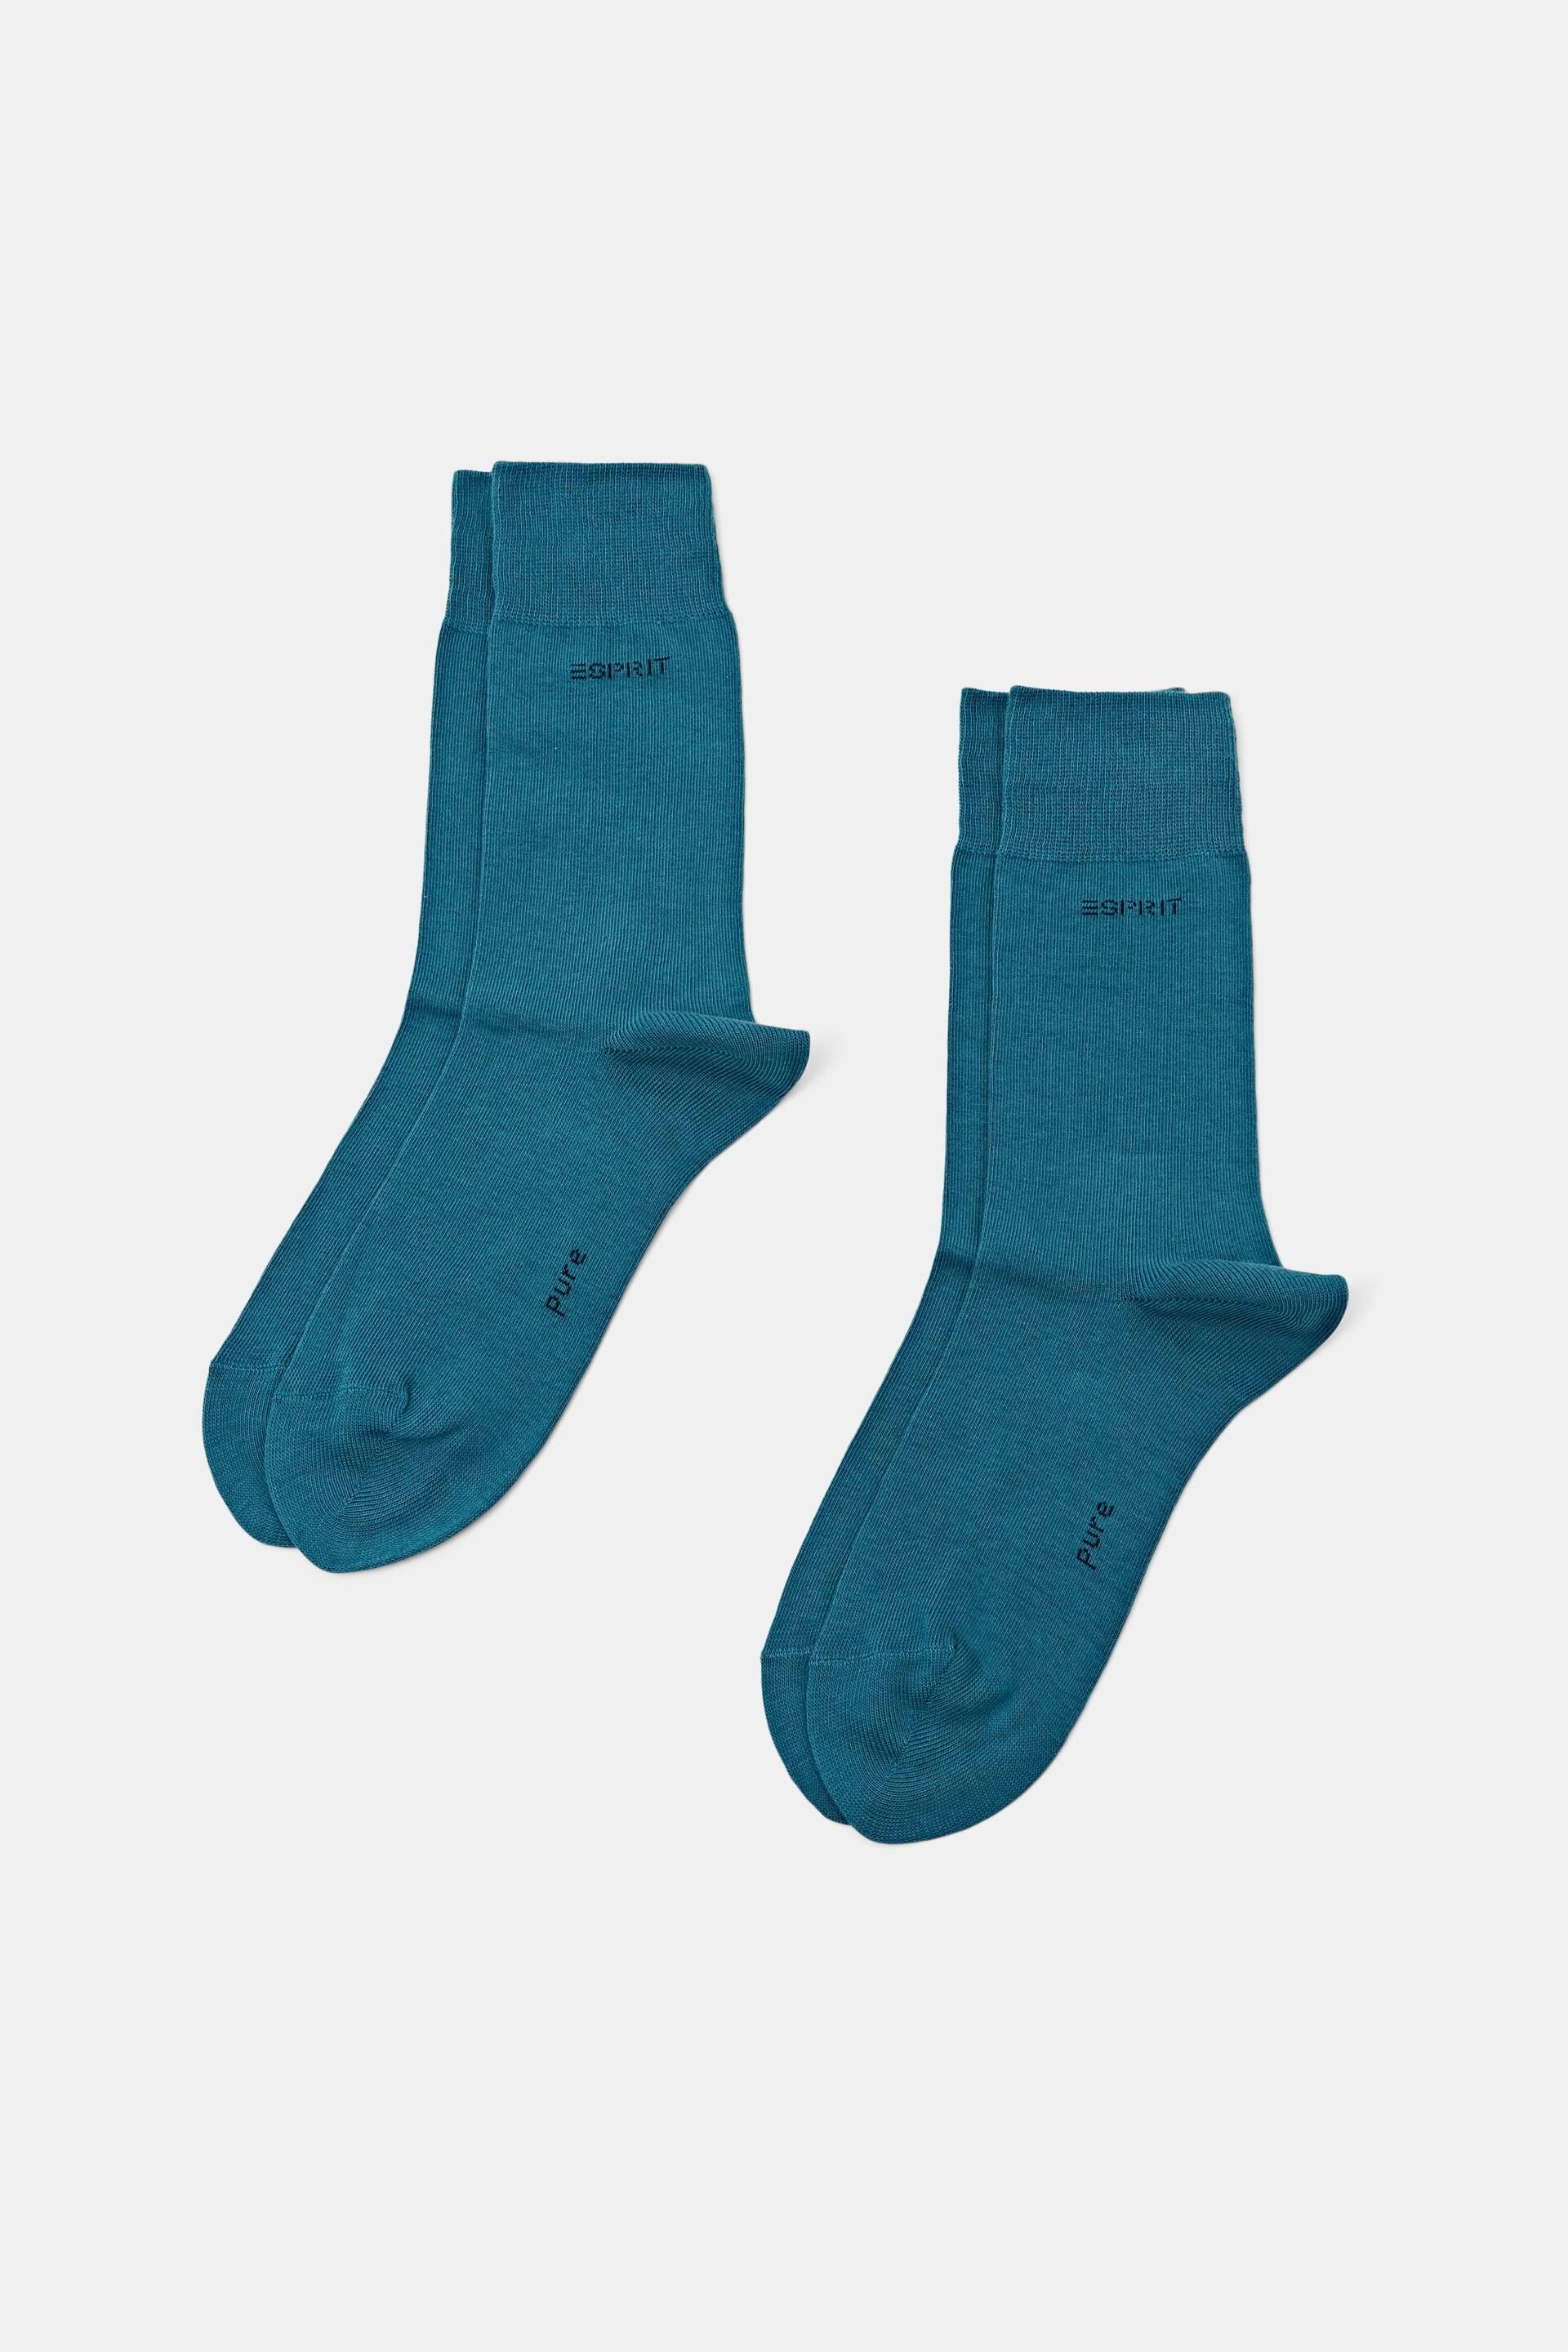 Esprit made Double pack cotton of organic socks blended